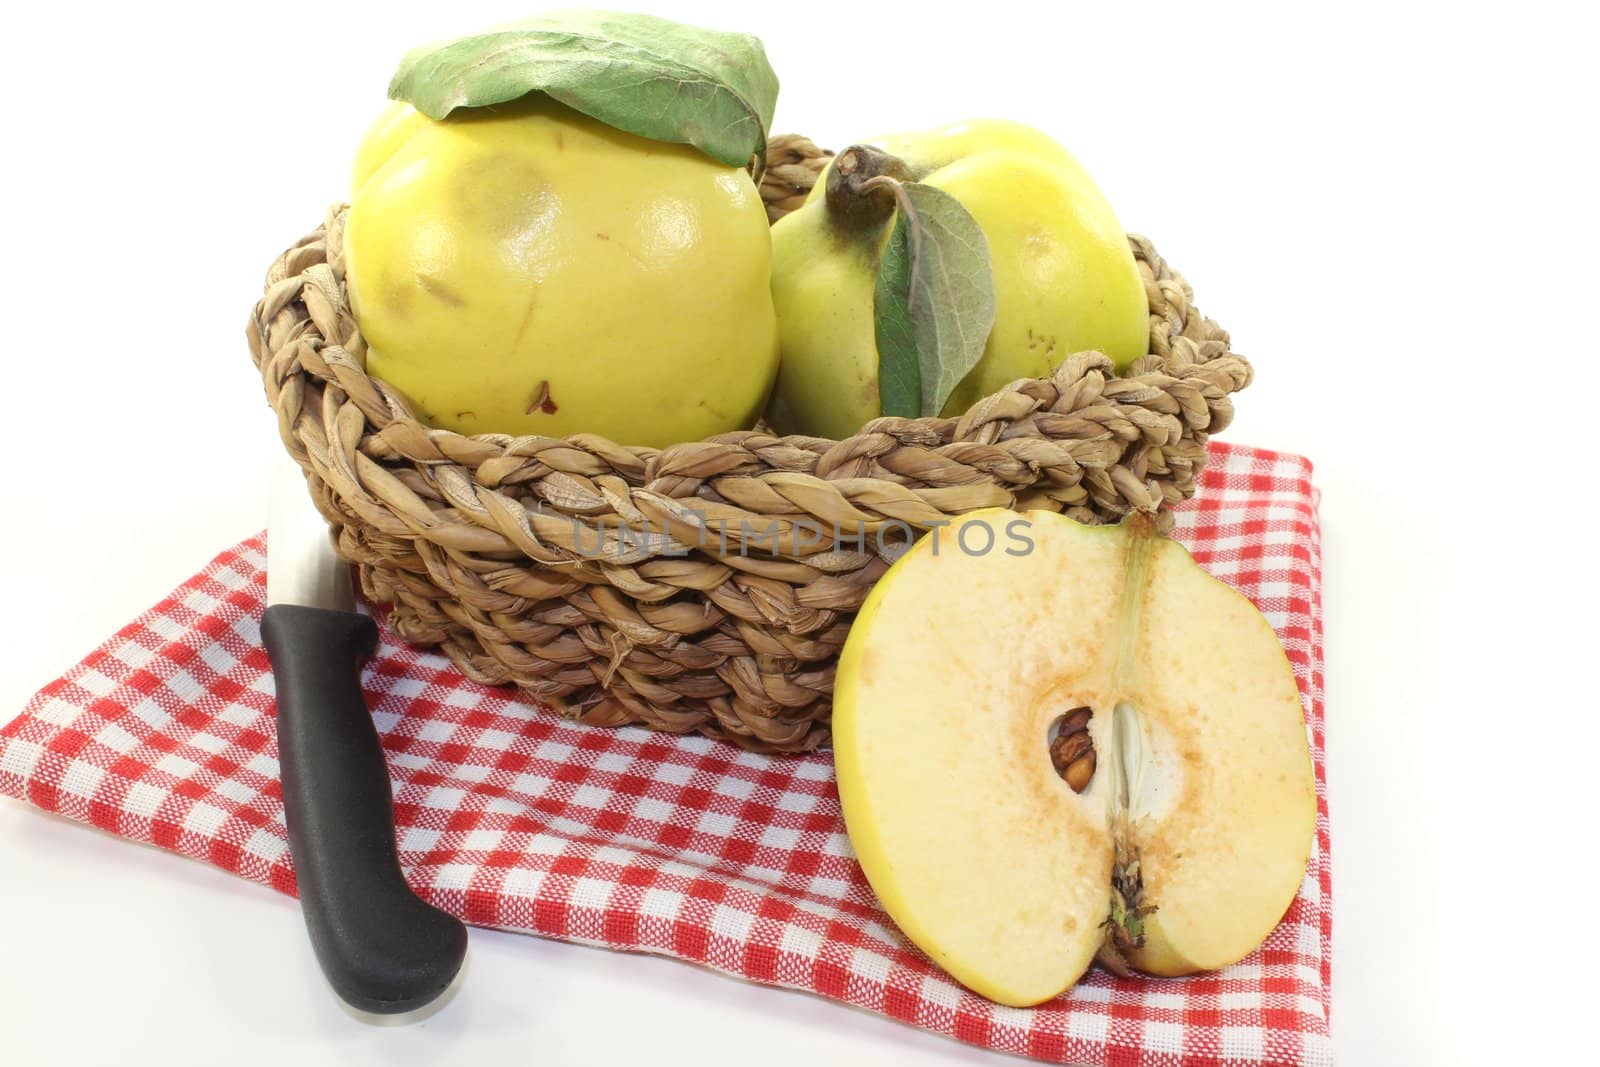 Quinces with leaves in a basket on a light background